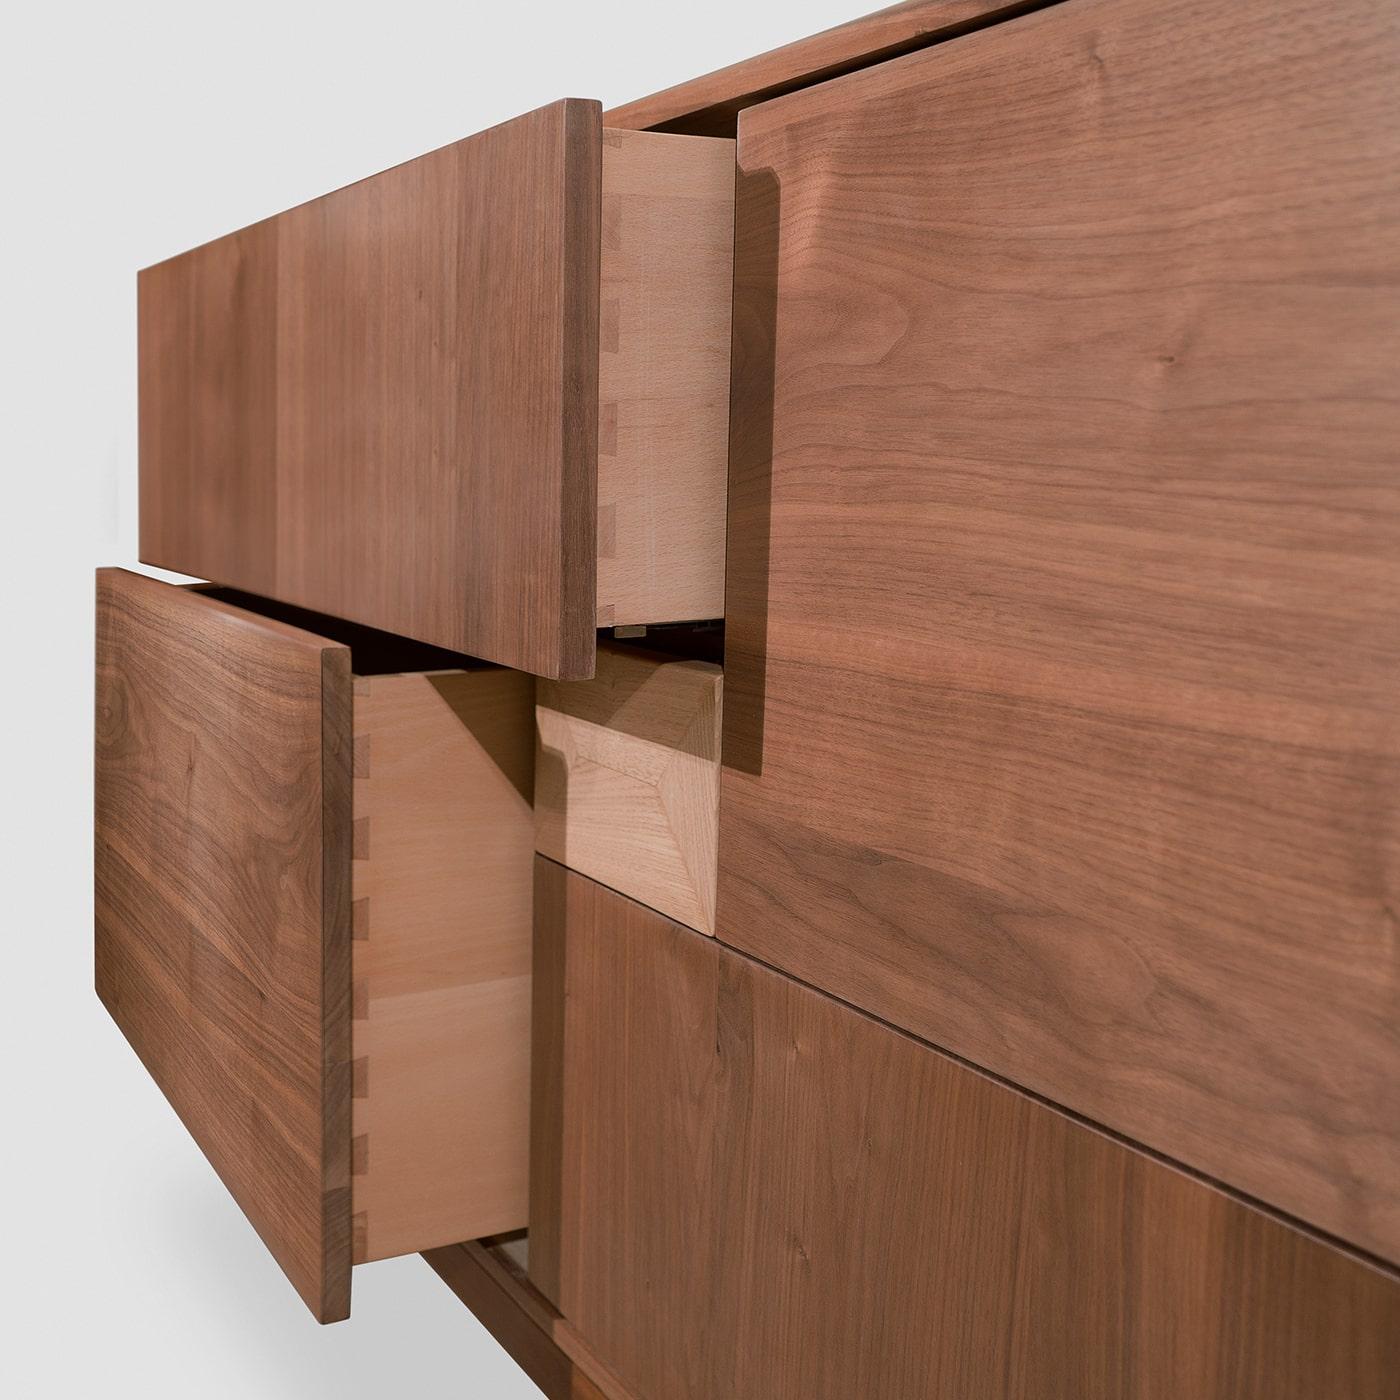 A striking interplay of clean geometric lines, this sideboard will make an elegant statement in a contemporary interior. Handcrafted of Canaletto walnut, it features five drawers placed in an asymmetrical, spiral-like order in different sizes.